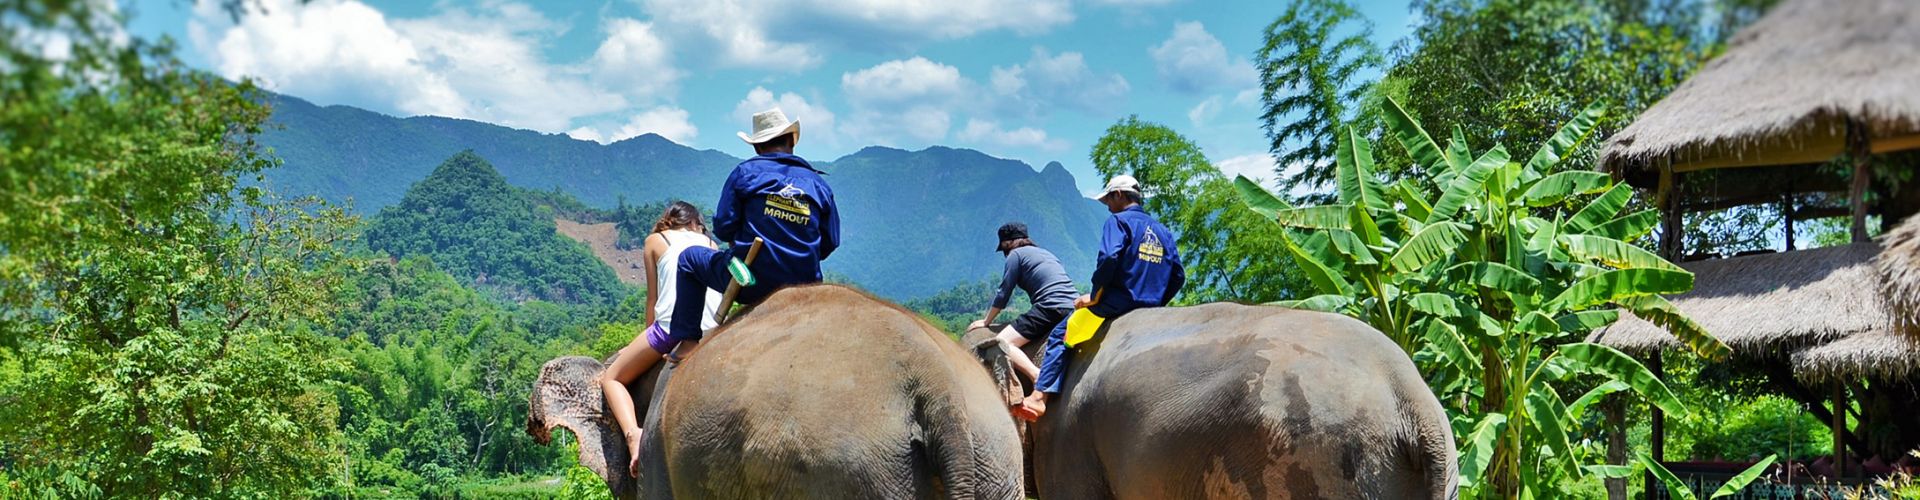 Top Attractions in Chiang Mai